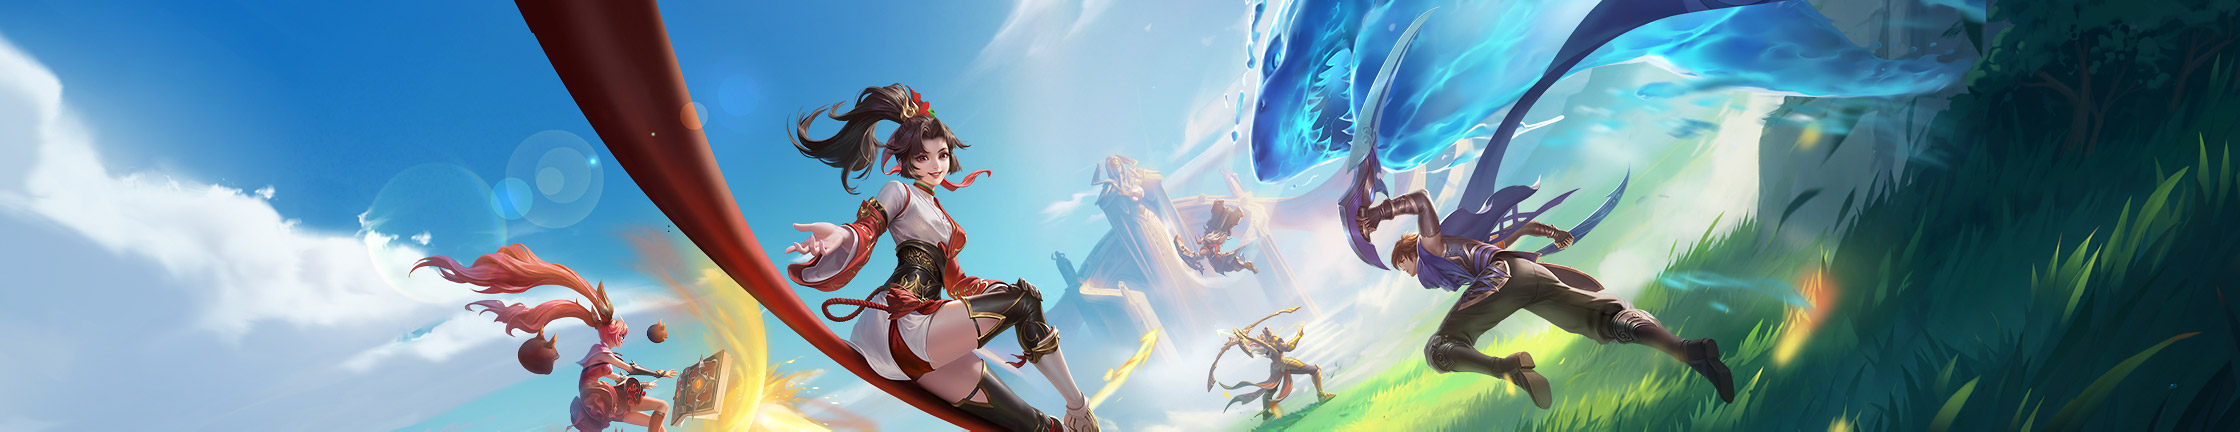 Honor of Kings Reveals Release Date for Brazil Launch